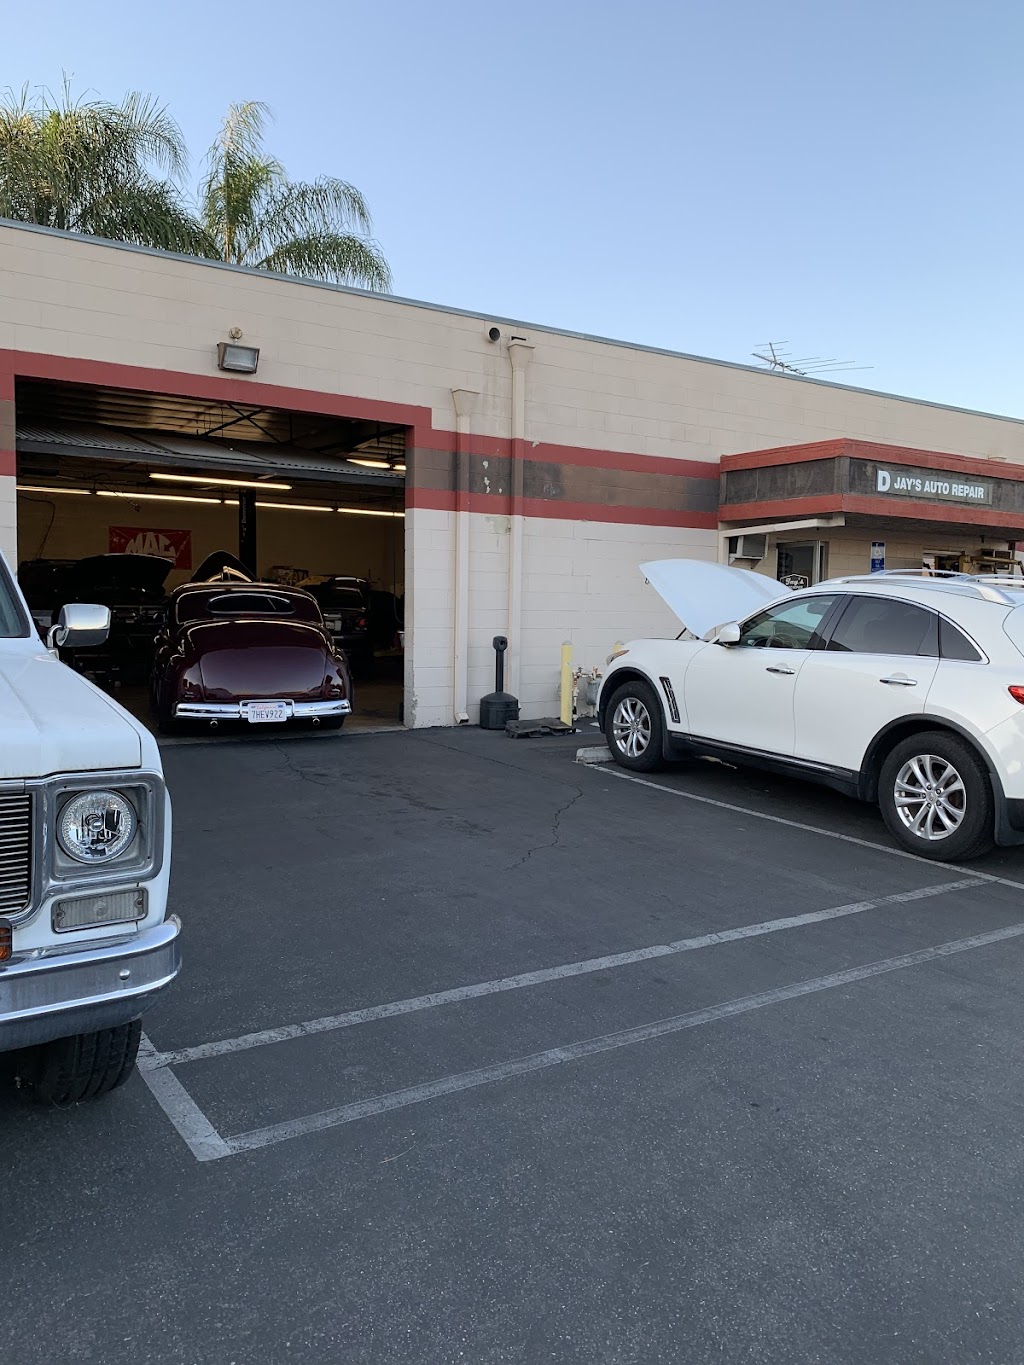 Jay’s Auto Repair | 13546 Central Ave ste d, Chino, CA 91710, USA | Phone: (909) 319-8606